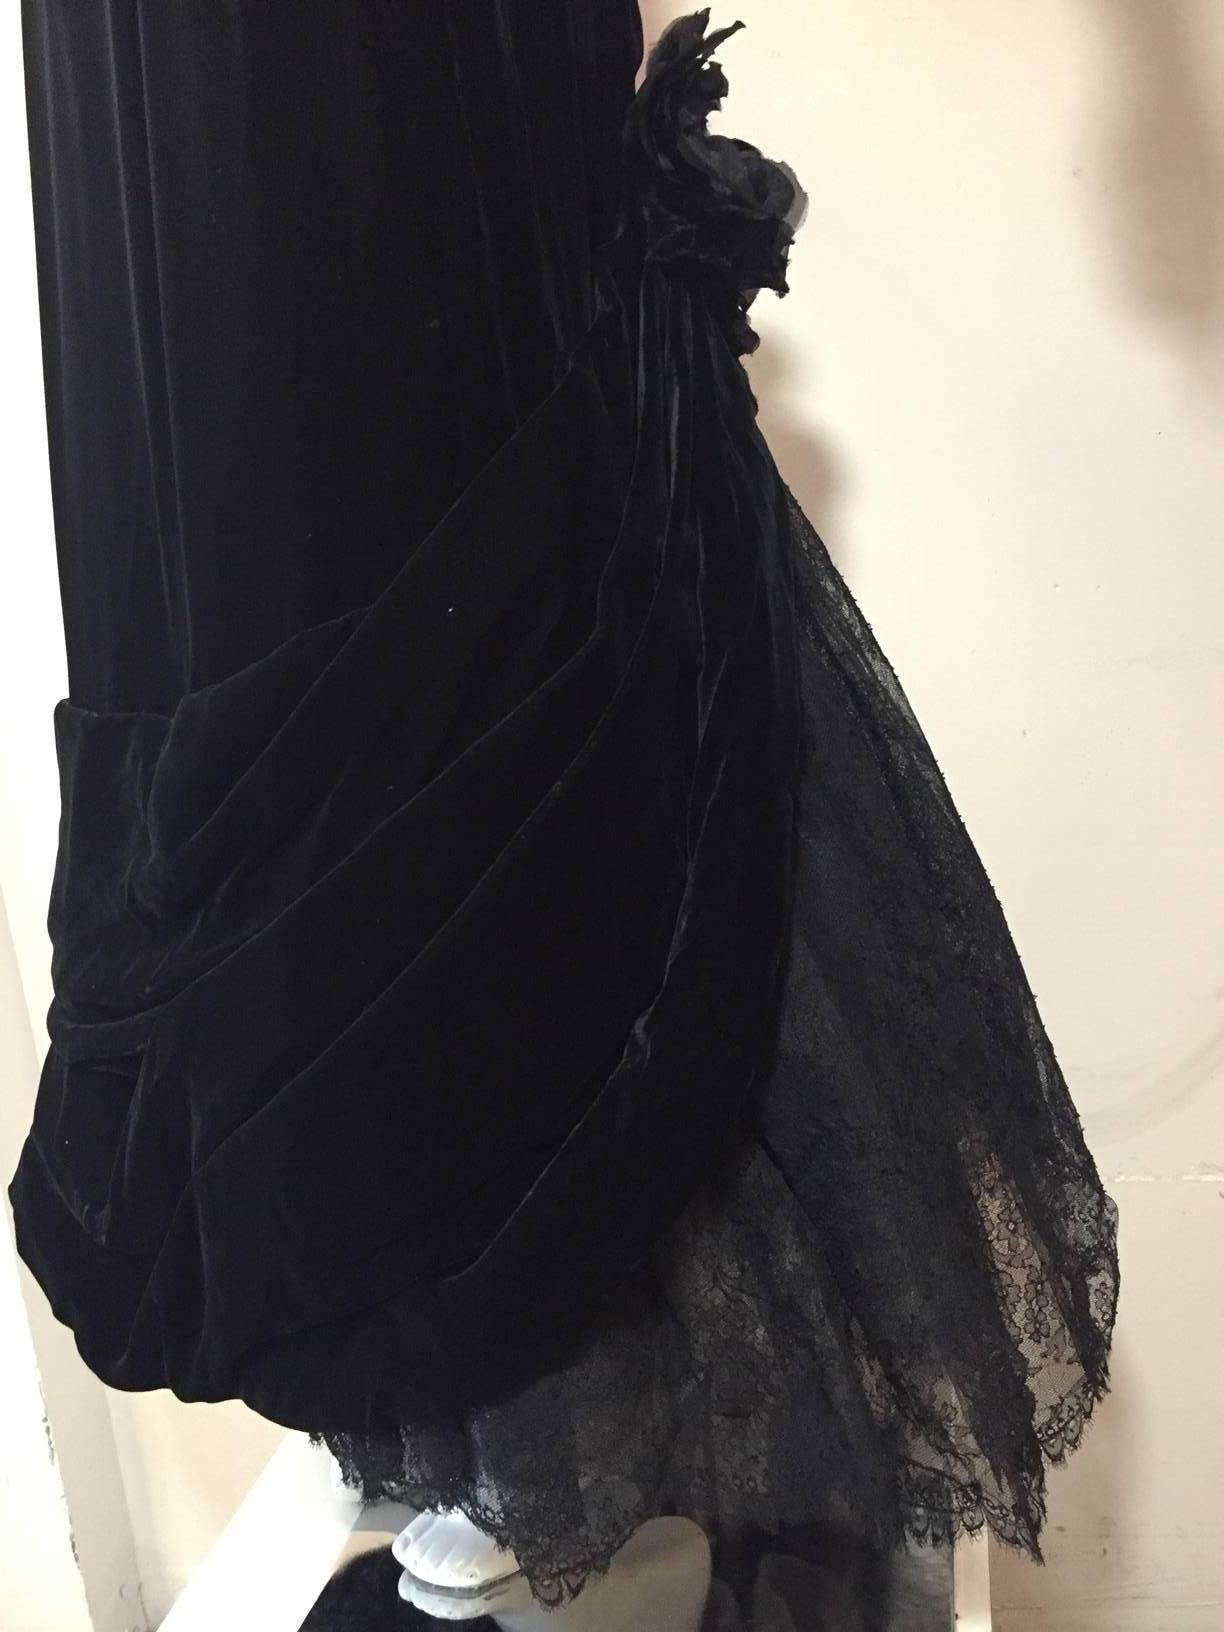 Women's 1980s Arnold Scaasi Black Velvet and Chantilly Lace Evening Gown w/ Fishtail Hem